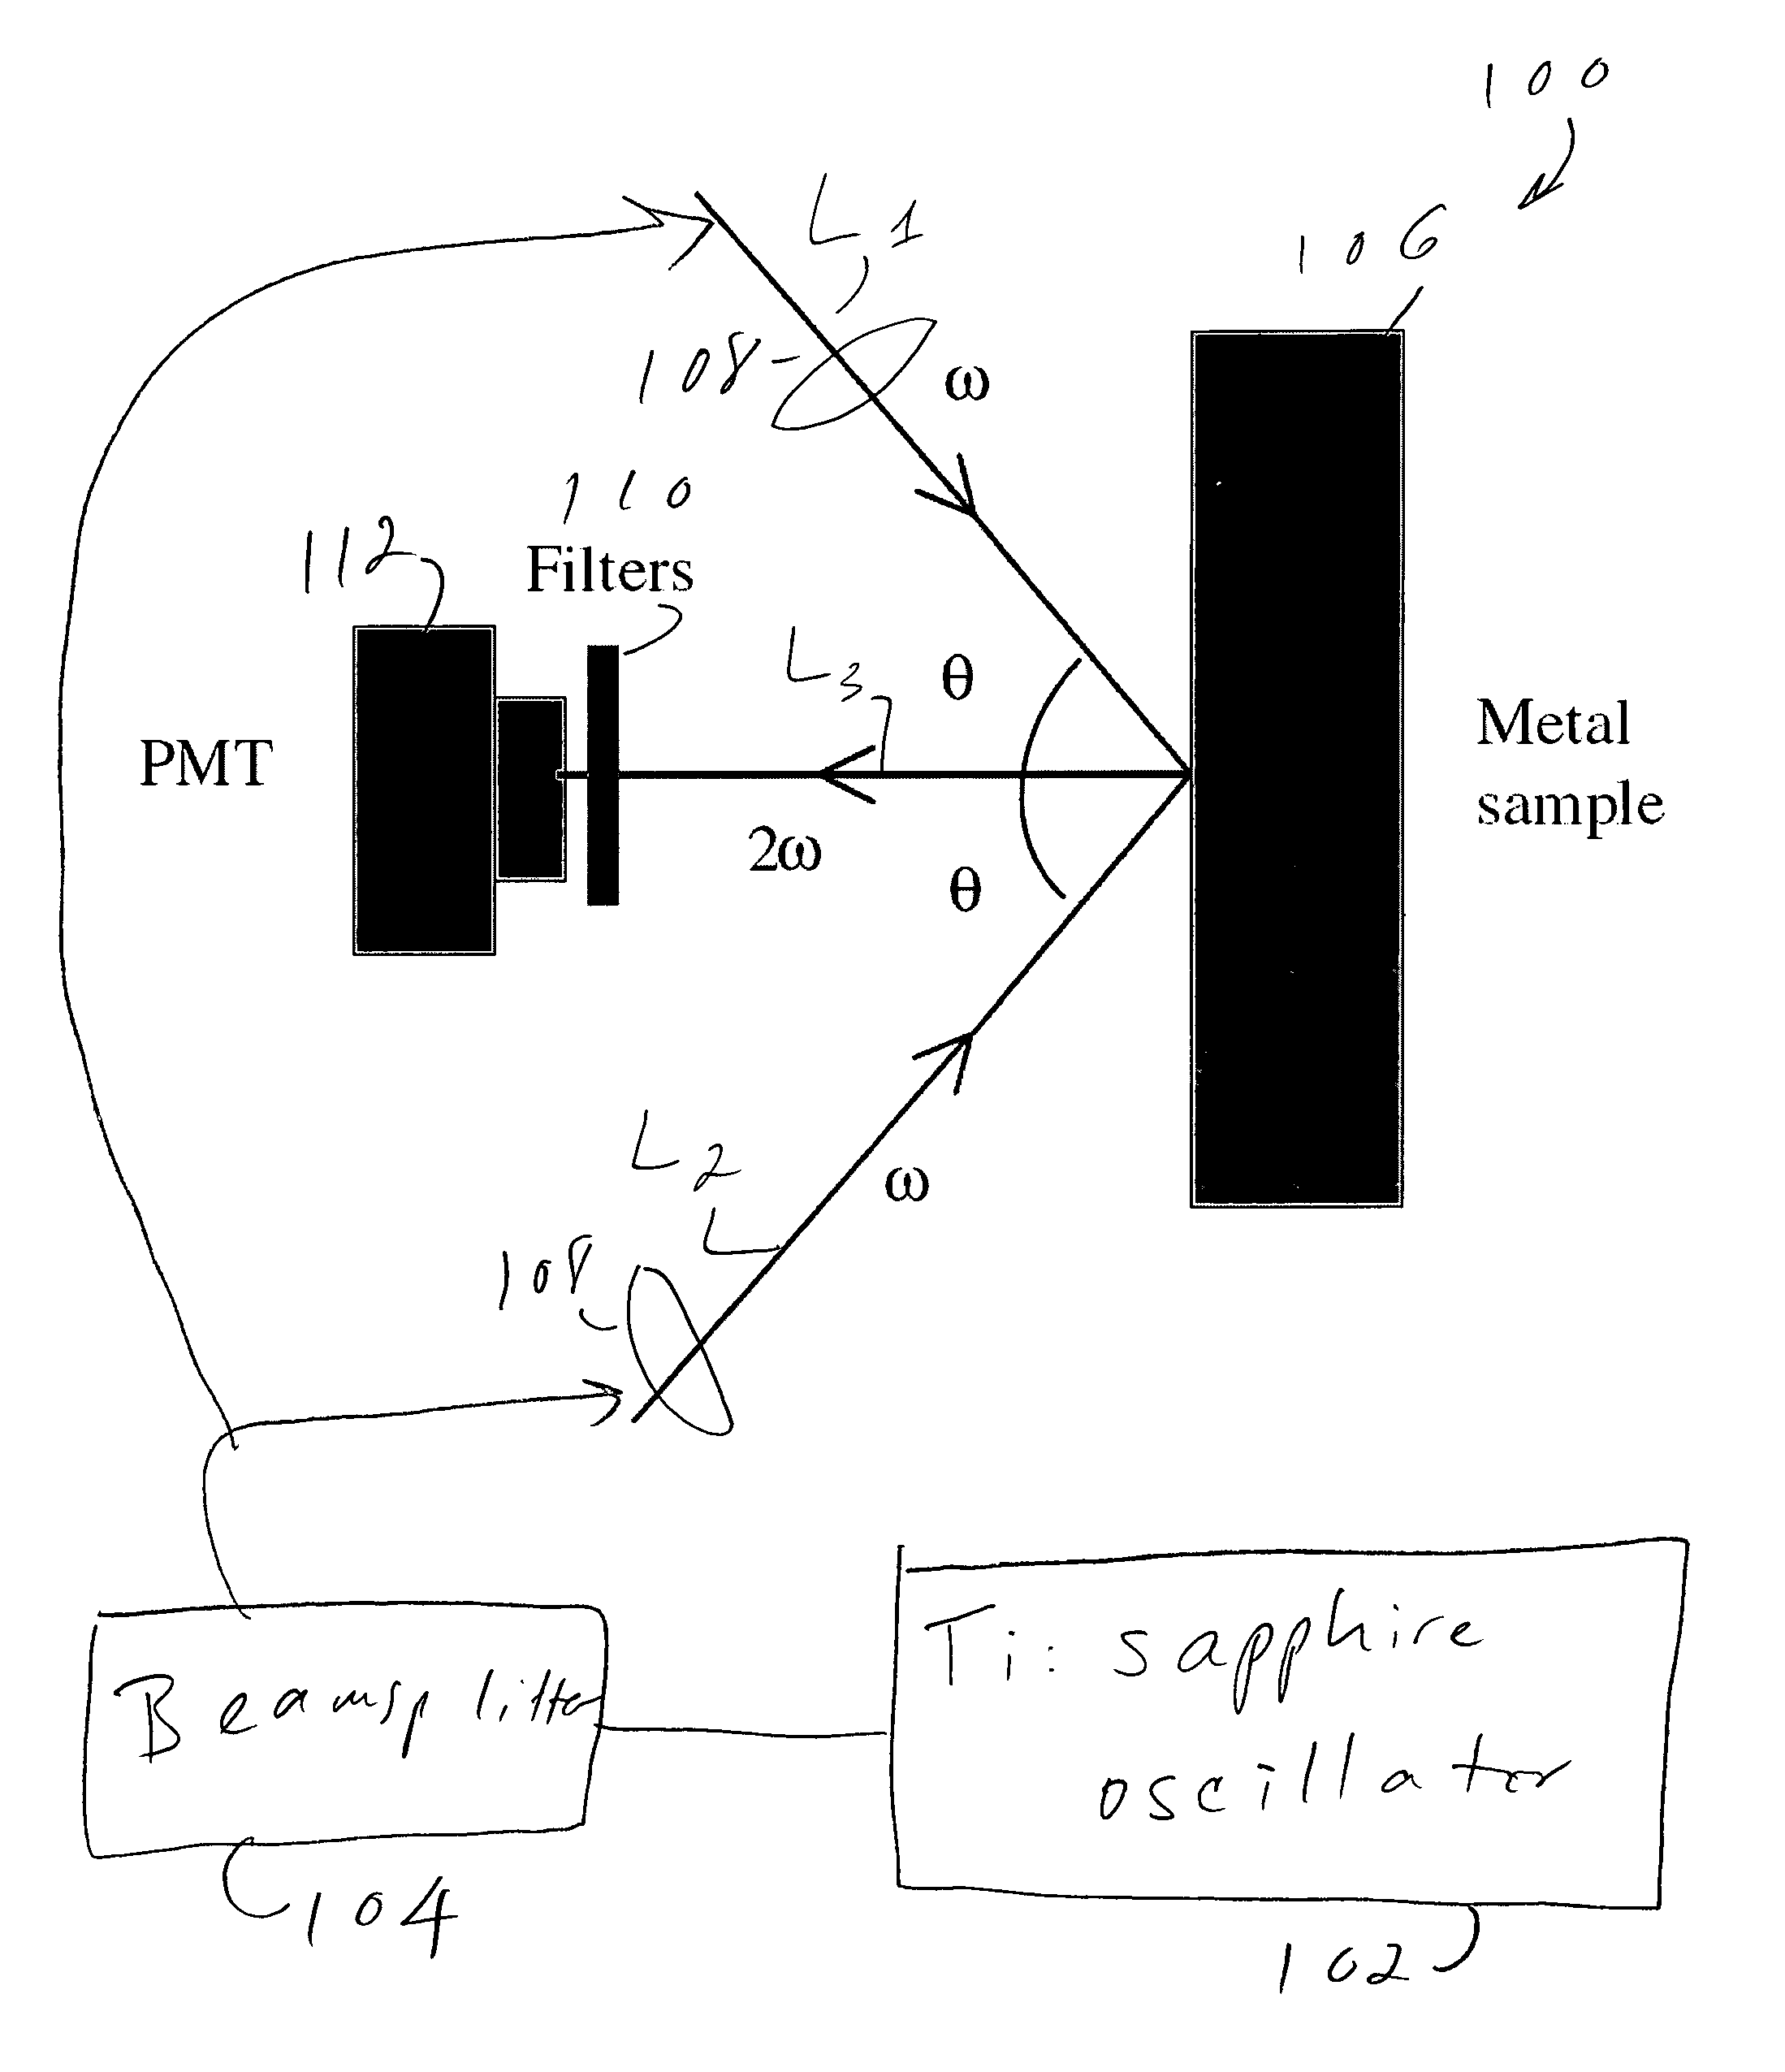 Dispersion-free, automatically phase-matched, and broad spectral-band femtosecond autocorrelation technique